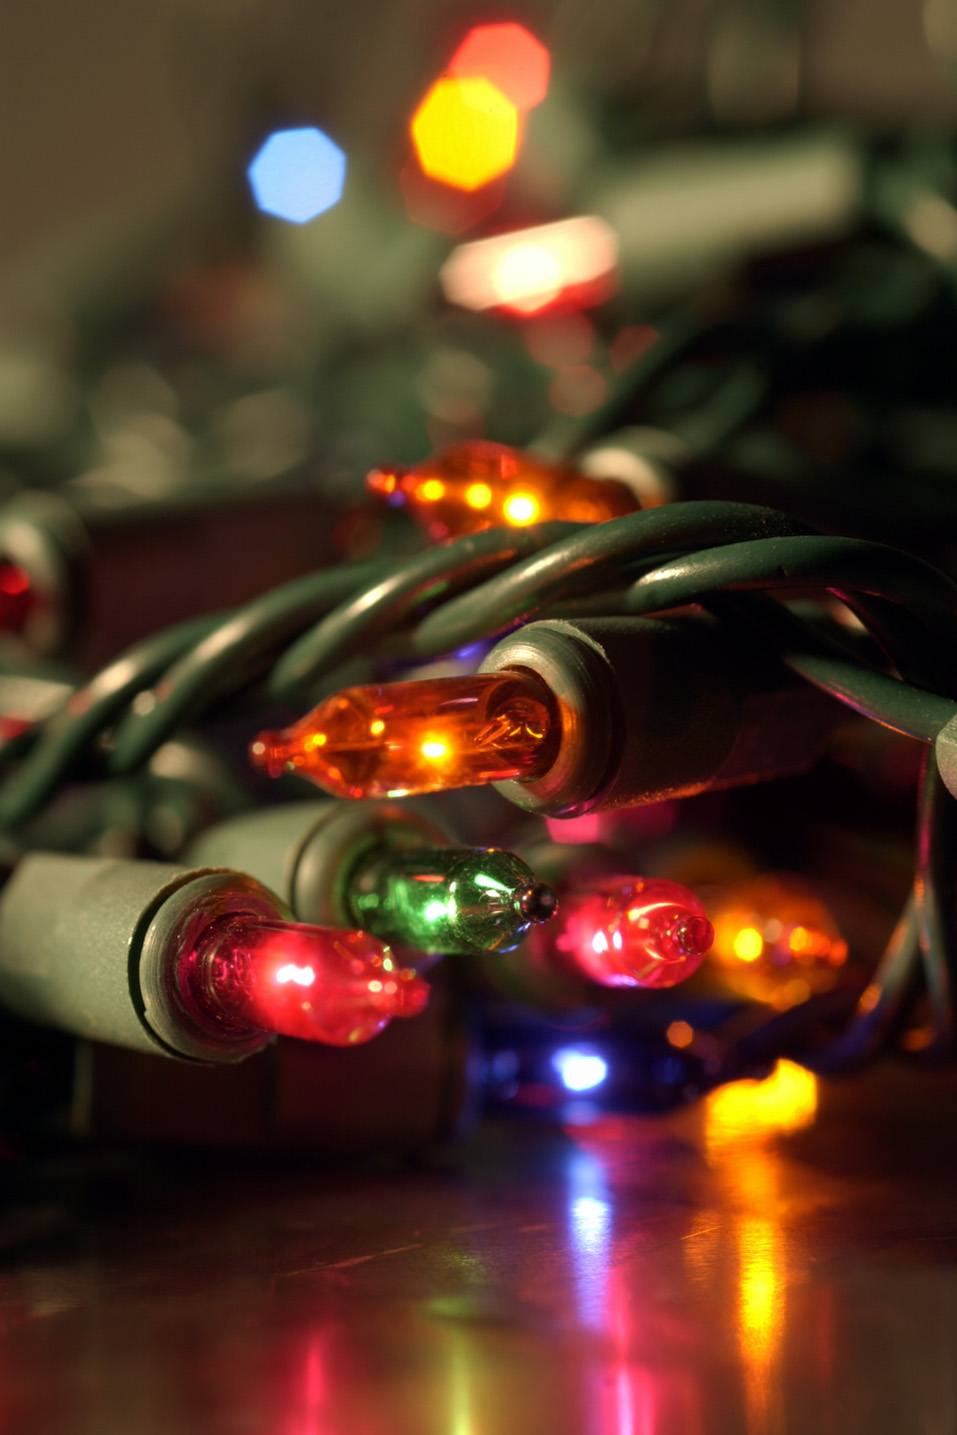 15 Reasons Why Putting Up Christmas Lights Is the Worst